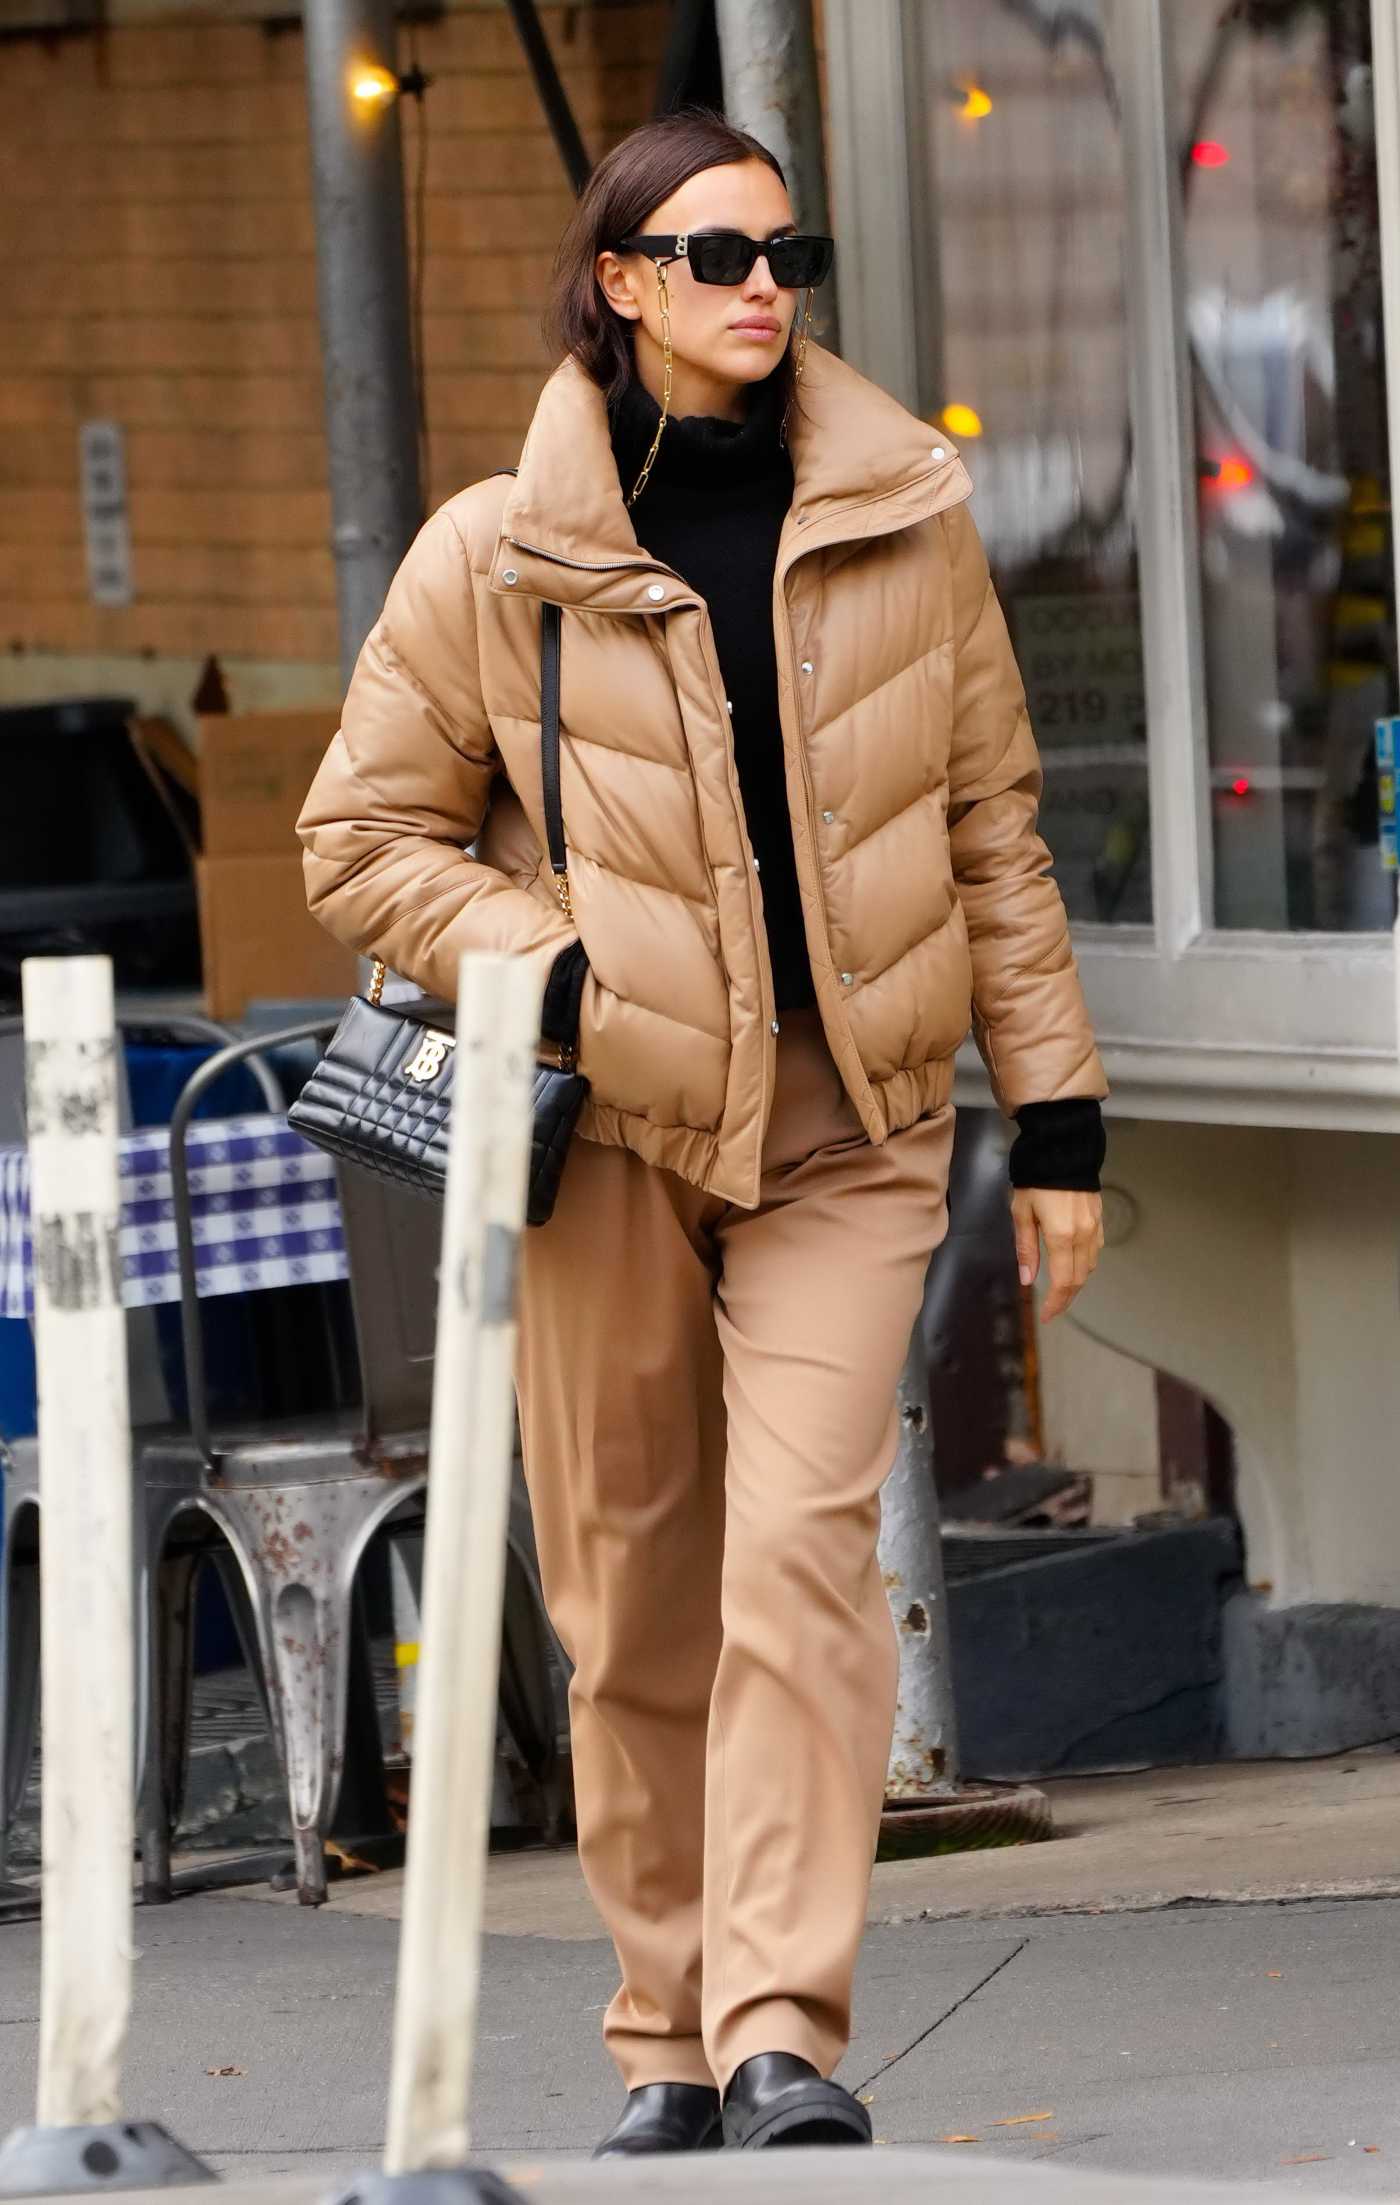 Irina Shayk in a Caramel Coloured Puffer Jacket Was Seen Out in New York 11/26/2021